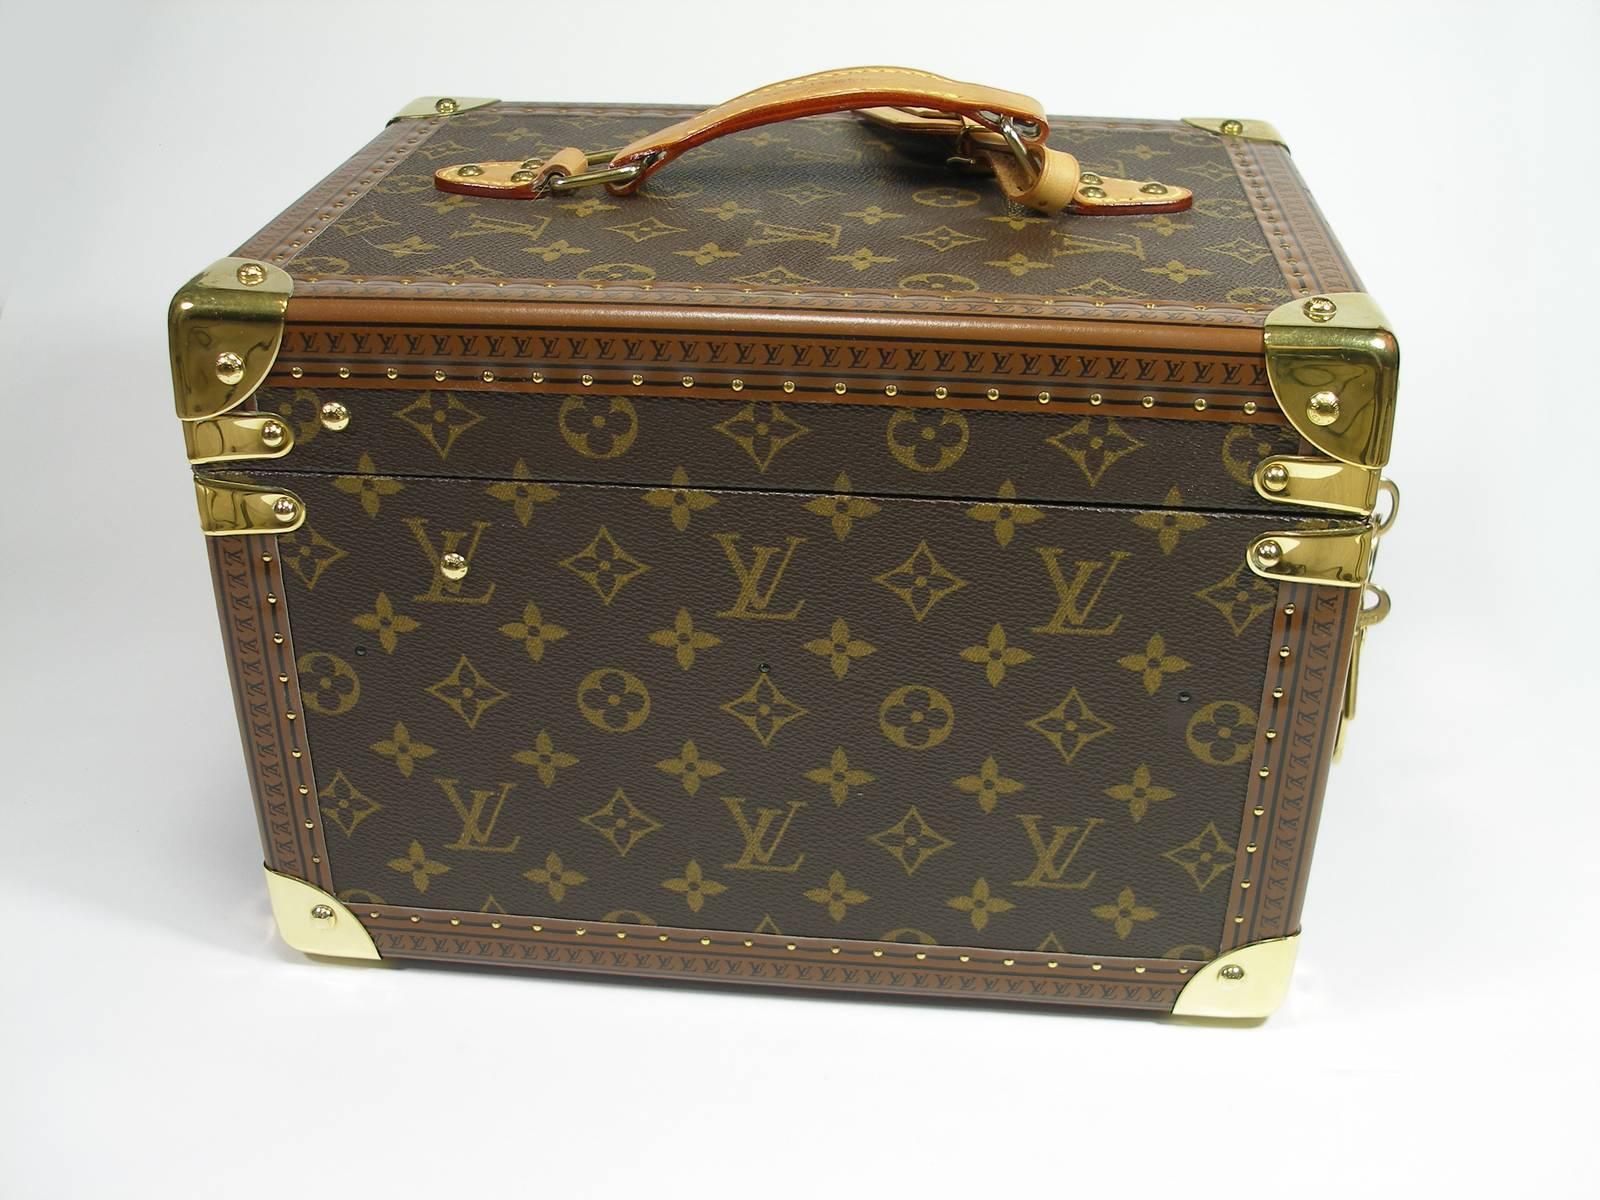 Magnifique Boite à Flacons Louis Vuitton
in Monogram canvas is reinforced with golden brass pieces.
with two keys and key ring and luggage tag
Dimensions : Longueur 21  x 20 Hauteur x profondeur 30 cm
Code date inside : 1093804
Rétail price 4850